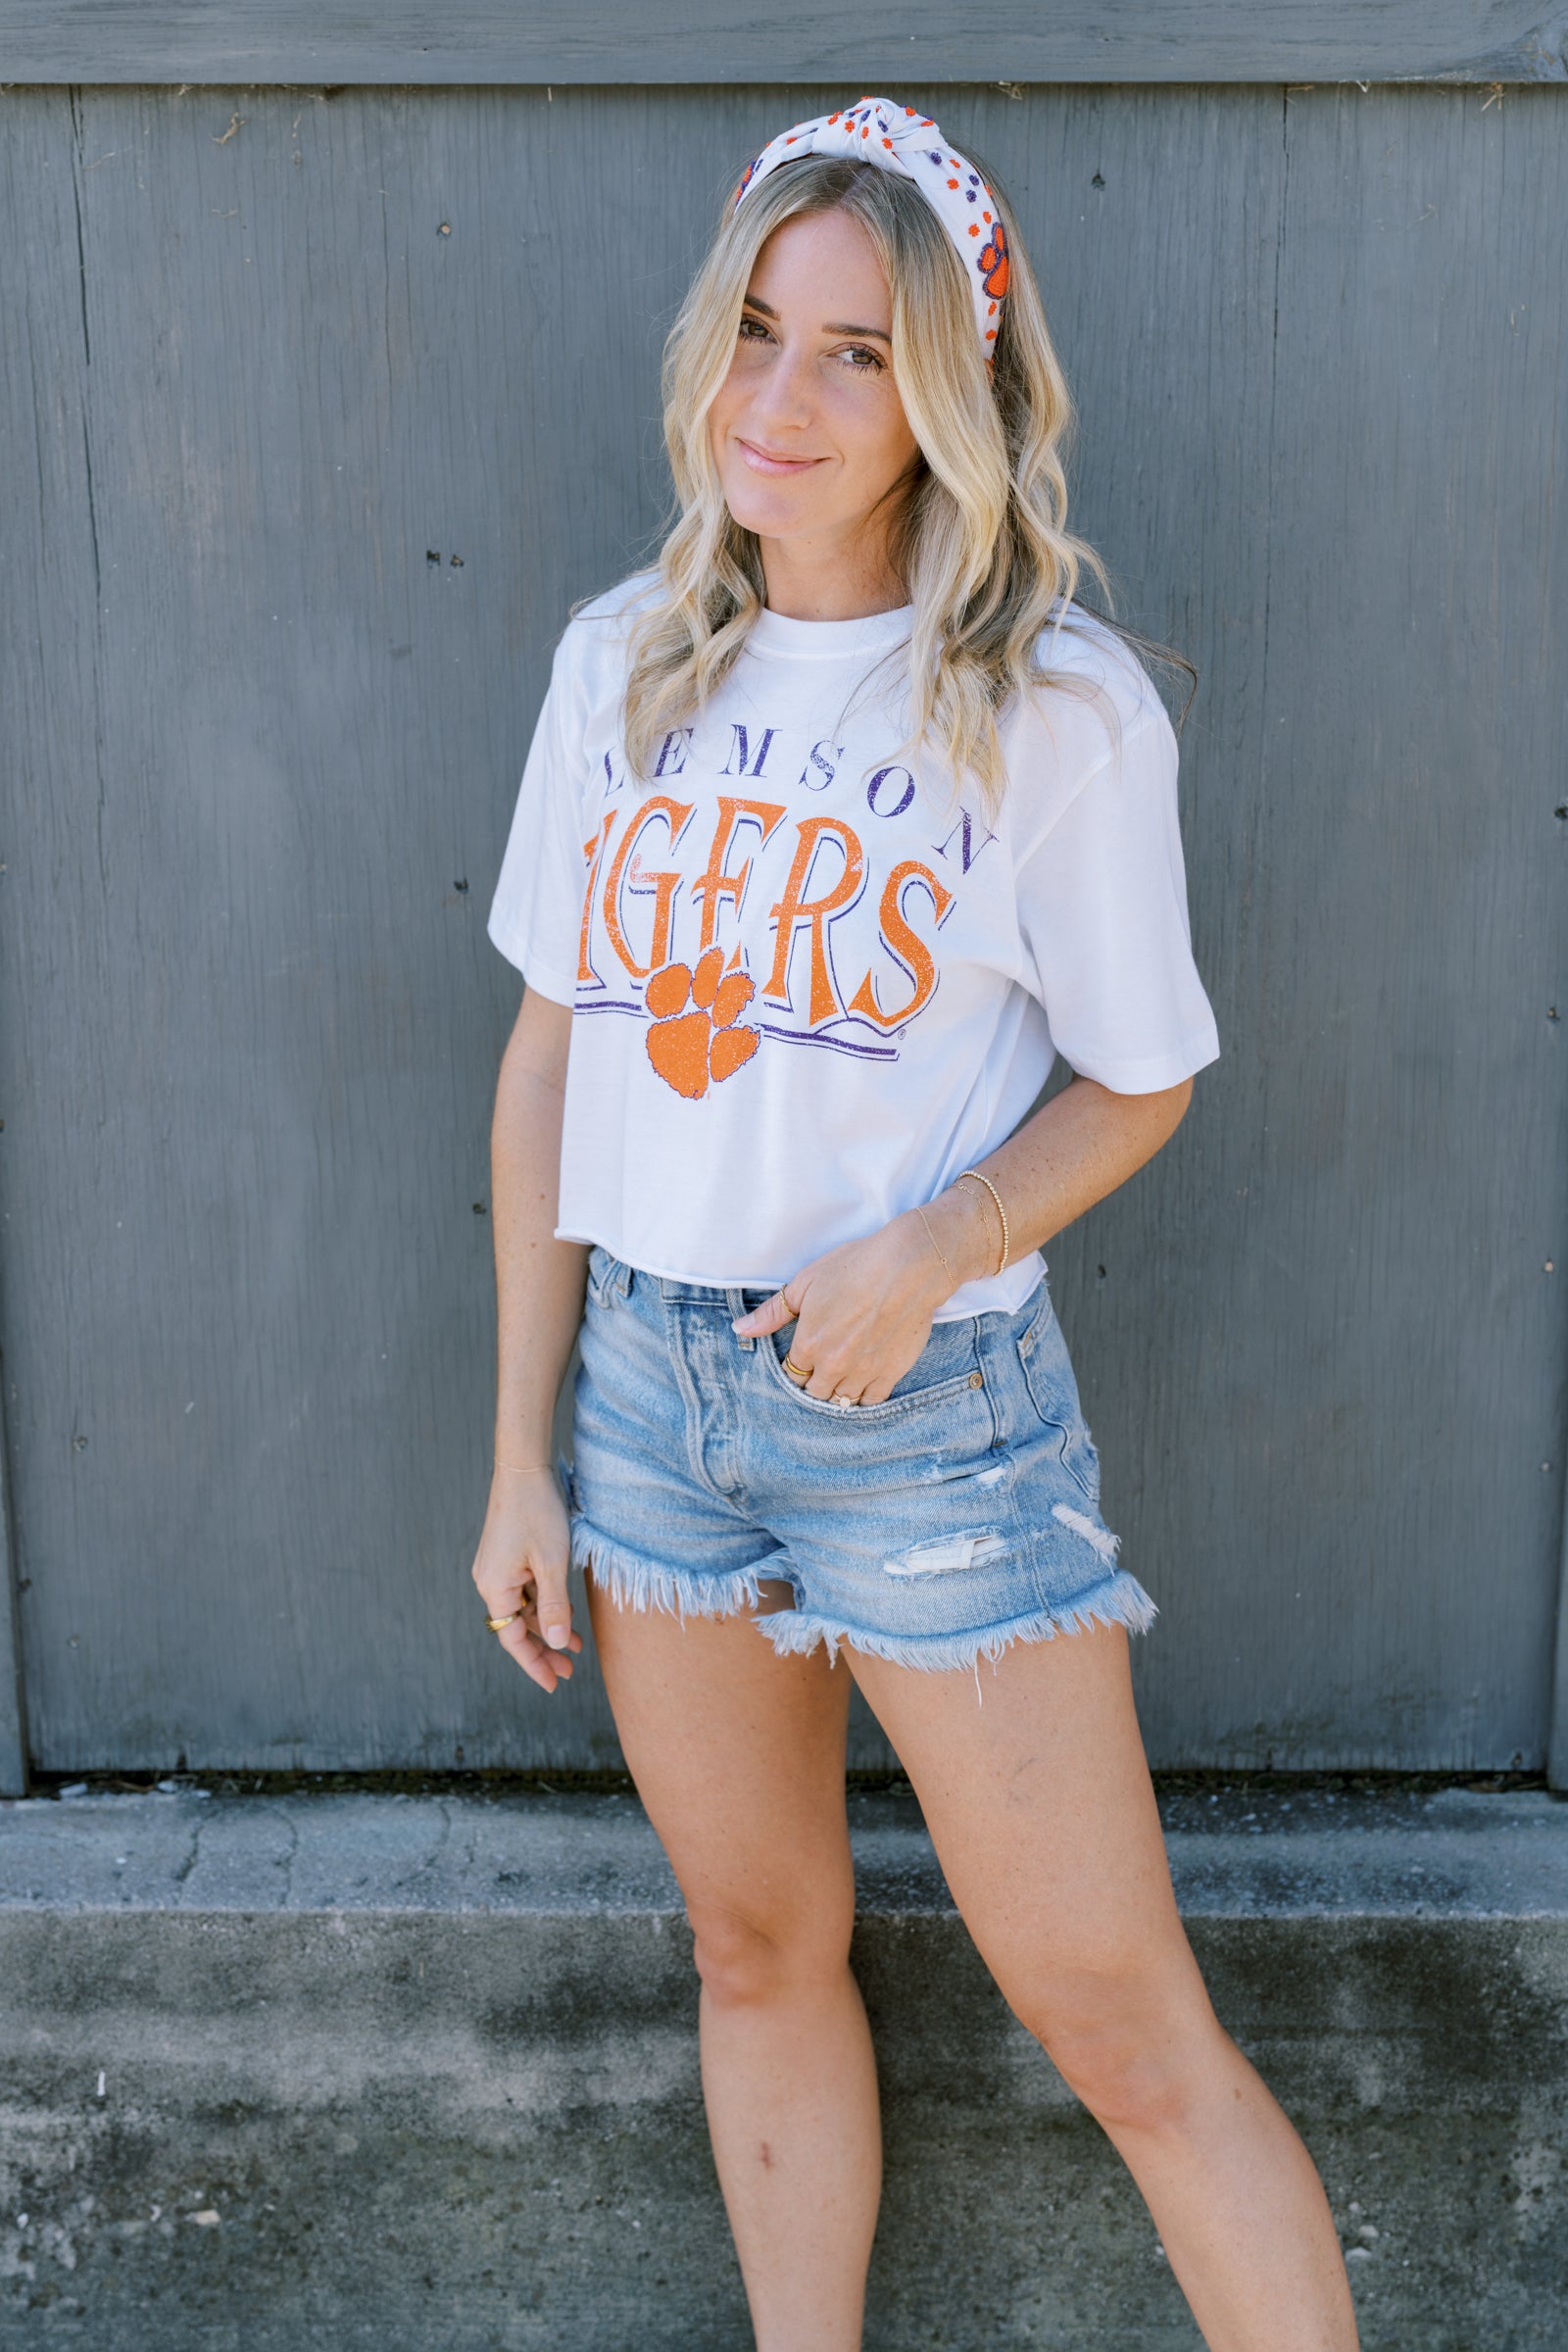 Clemson Tigers 80's Cropped Tee